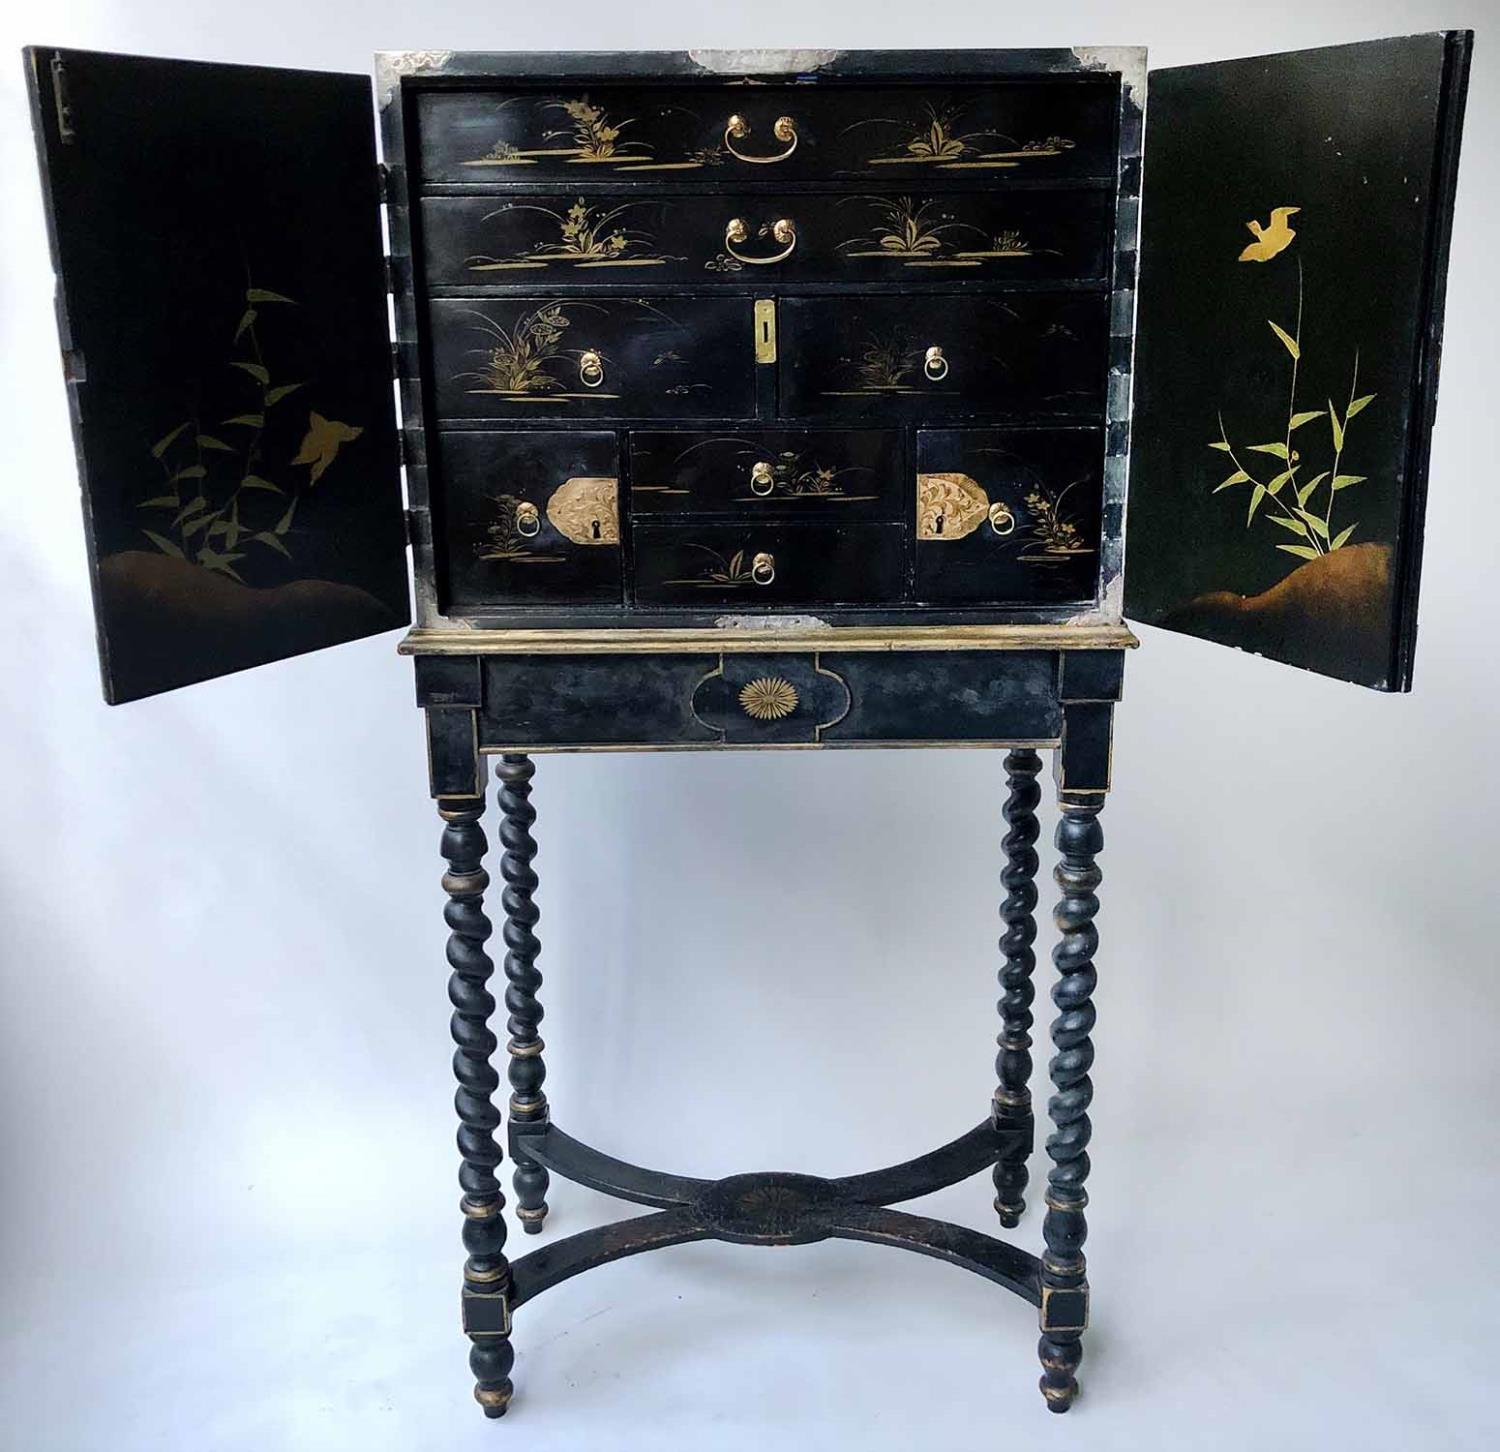 CABINET ON STAND, 18th century Chinese export decorated gilt and black lacquer with two doors - Image 3 of 6